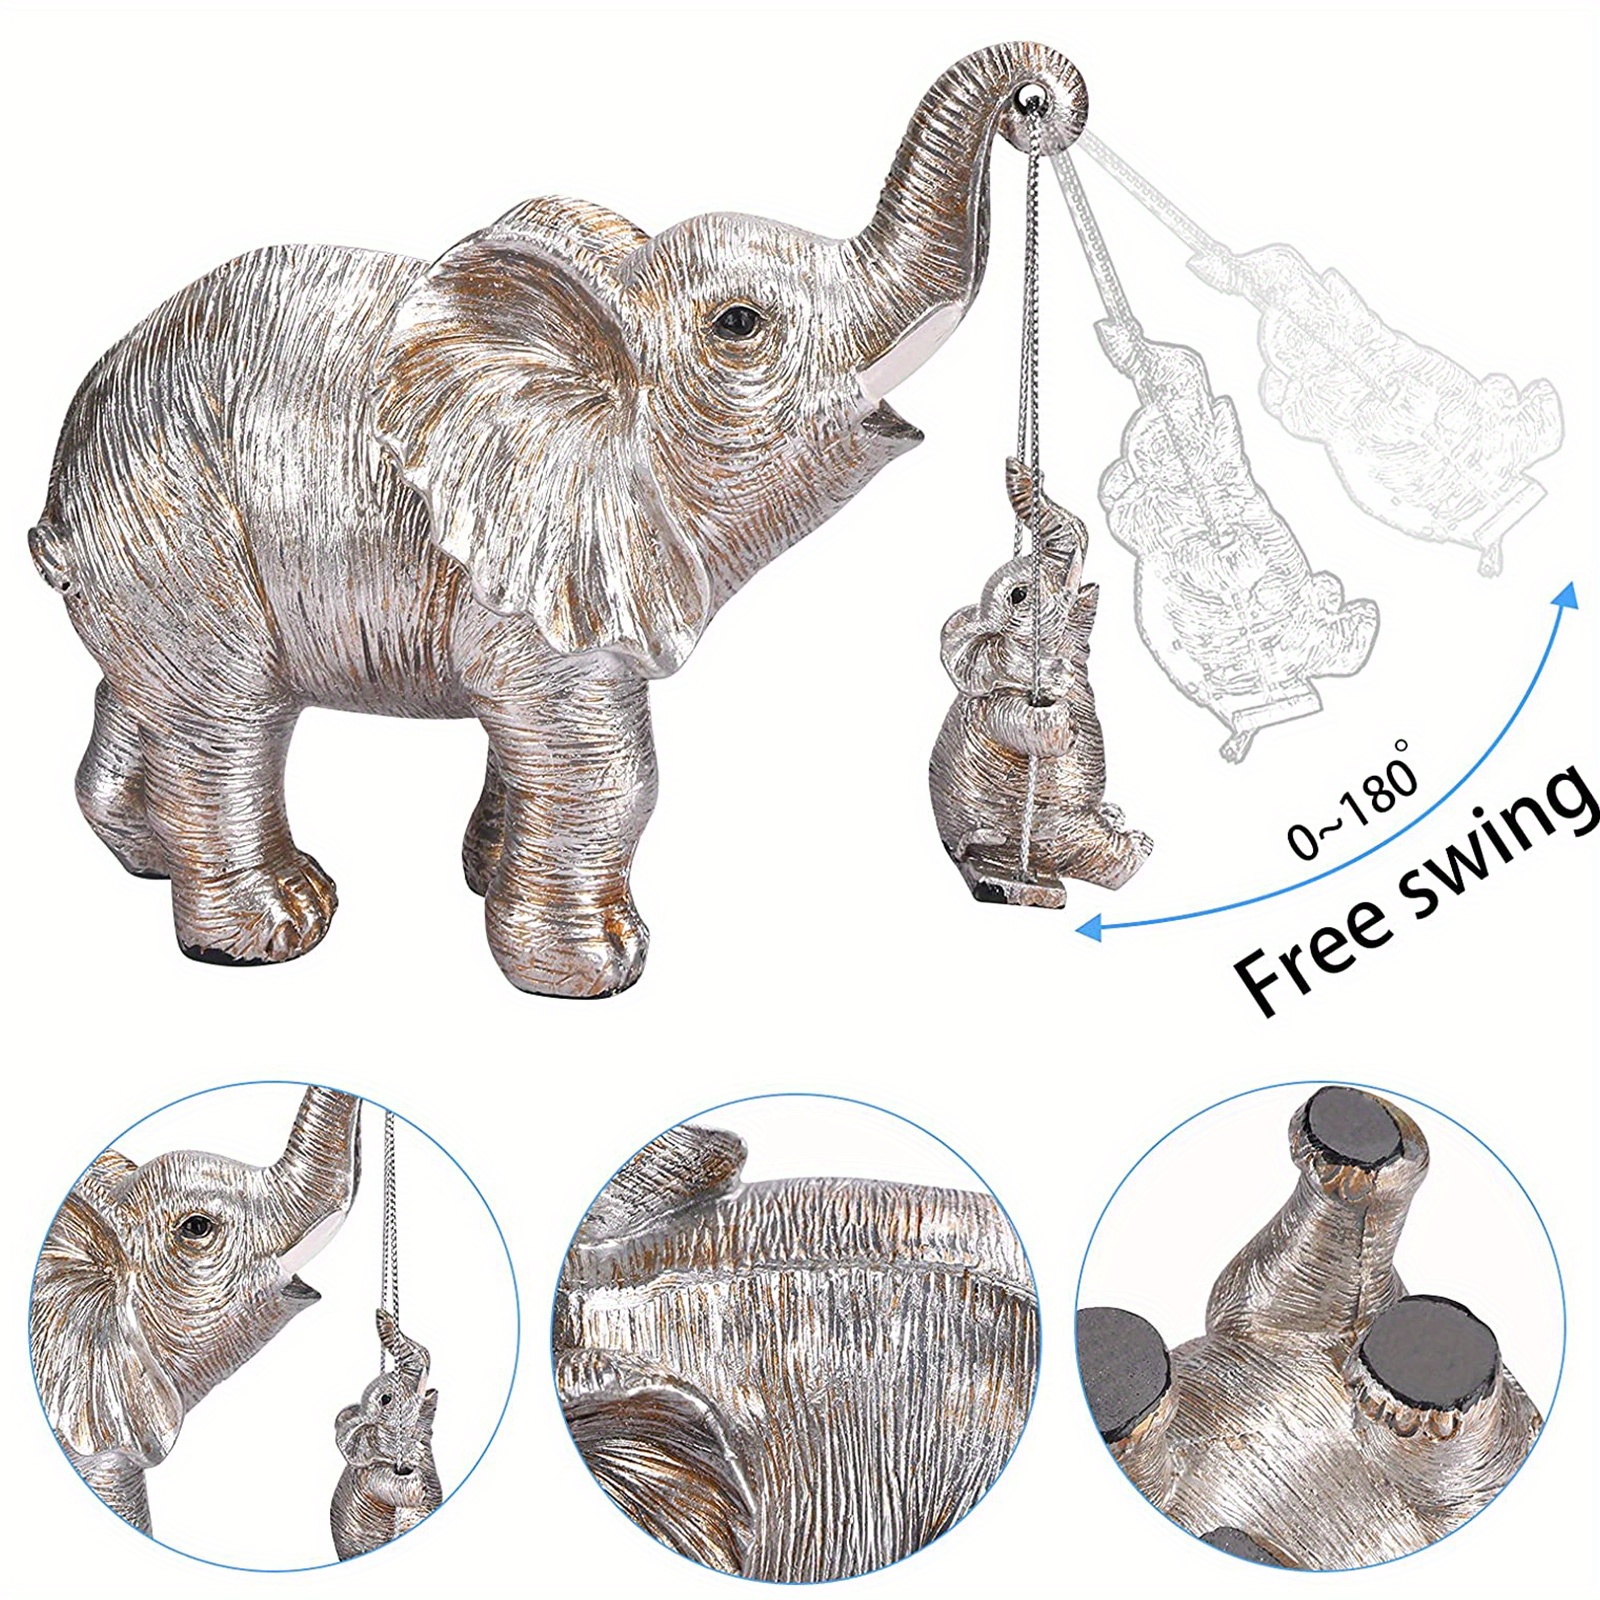 Decorative Elephant S00 - Art of Living - Sports and Lifestyle